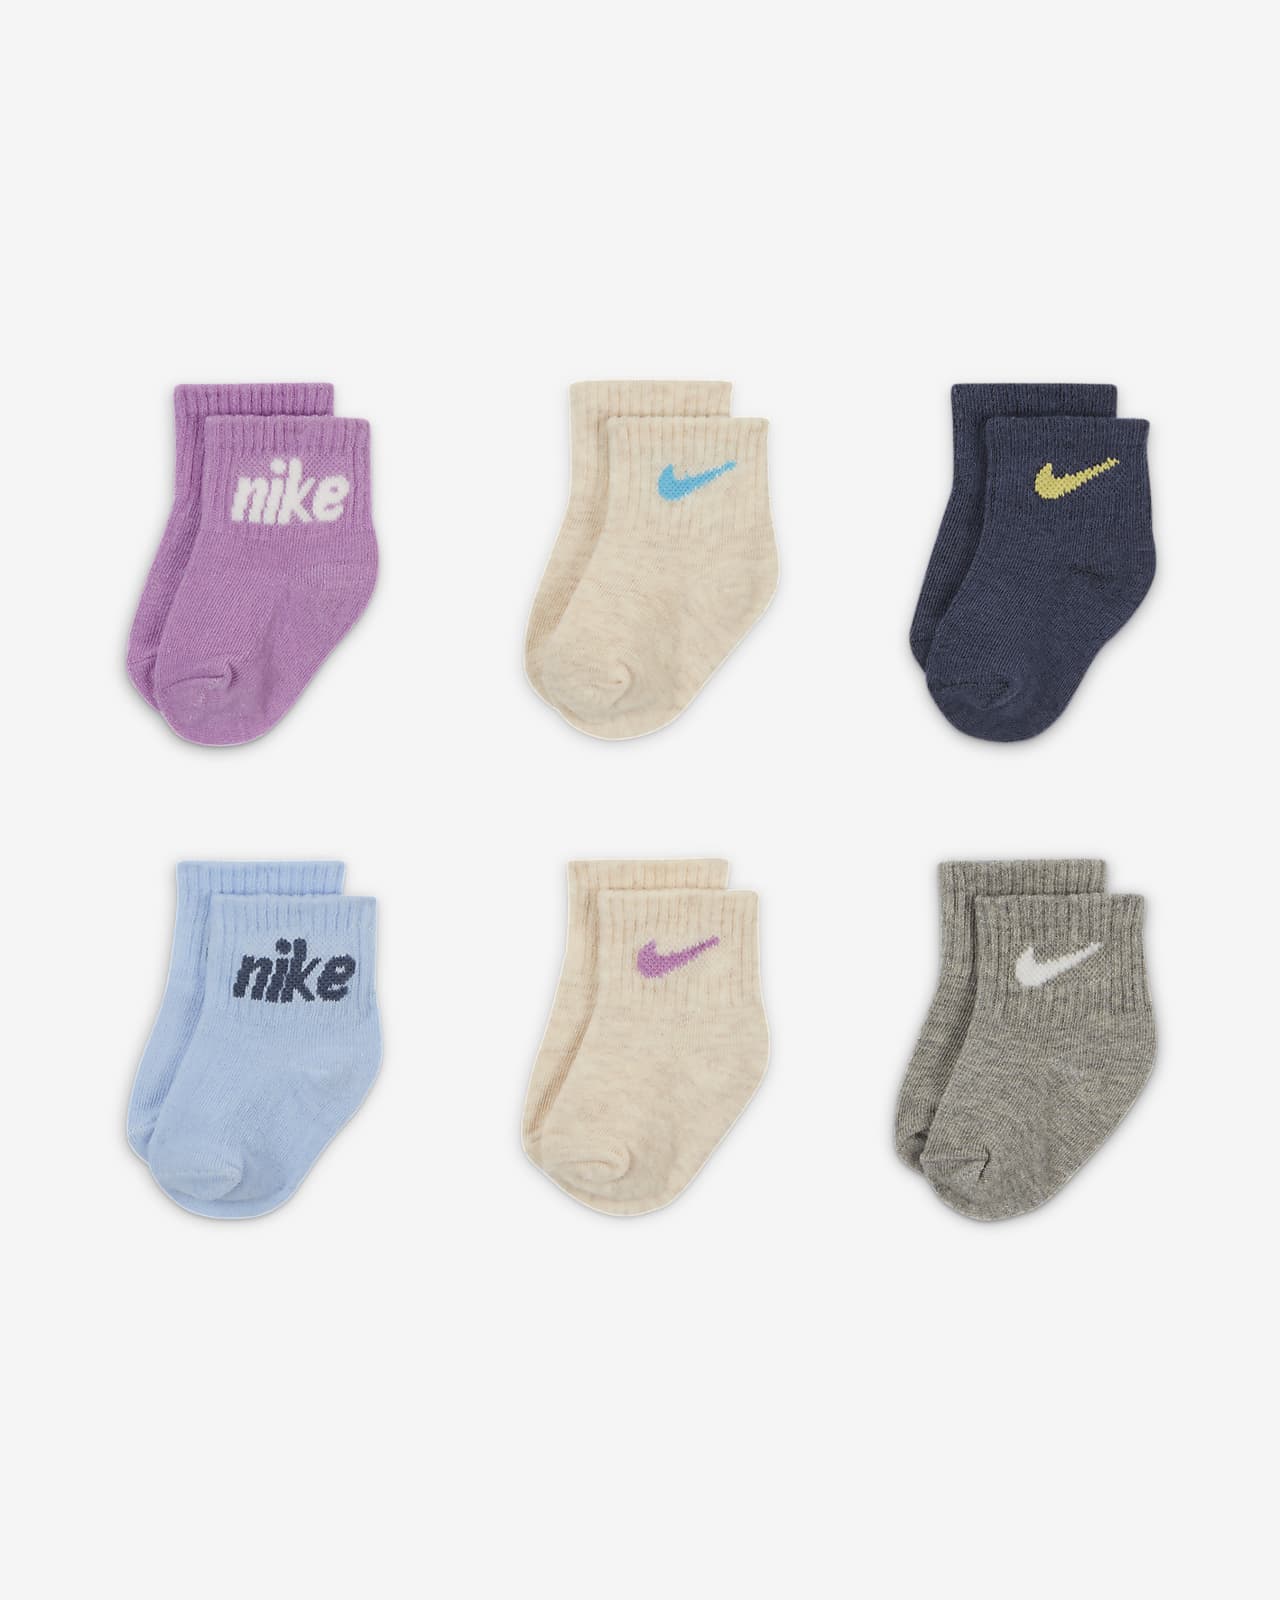 Nike Everyone From Day One Baby (0-6M) Socks Box Set (6-Pairs)